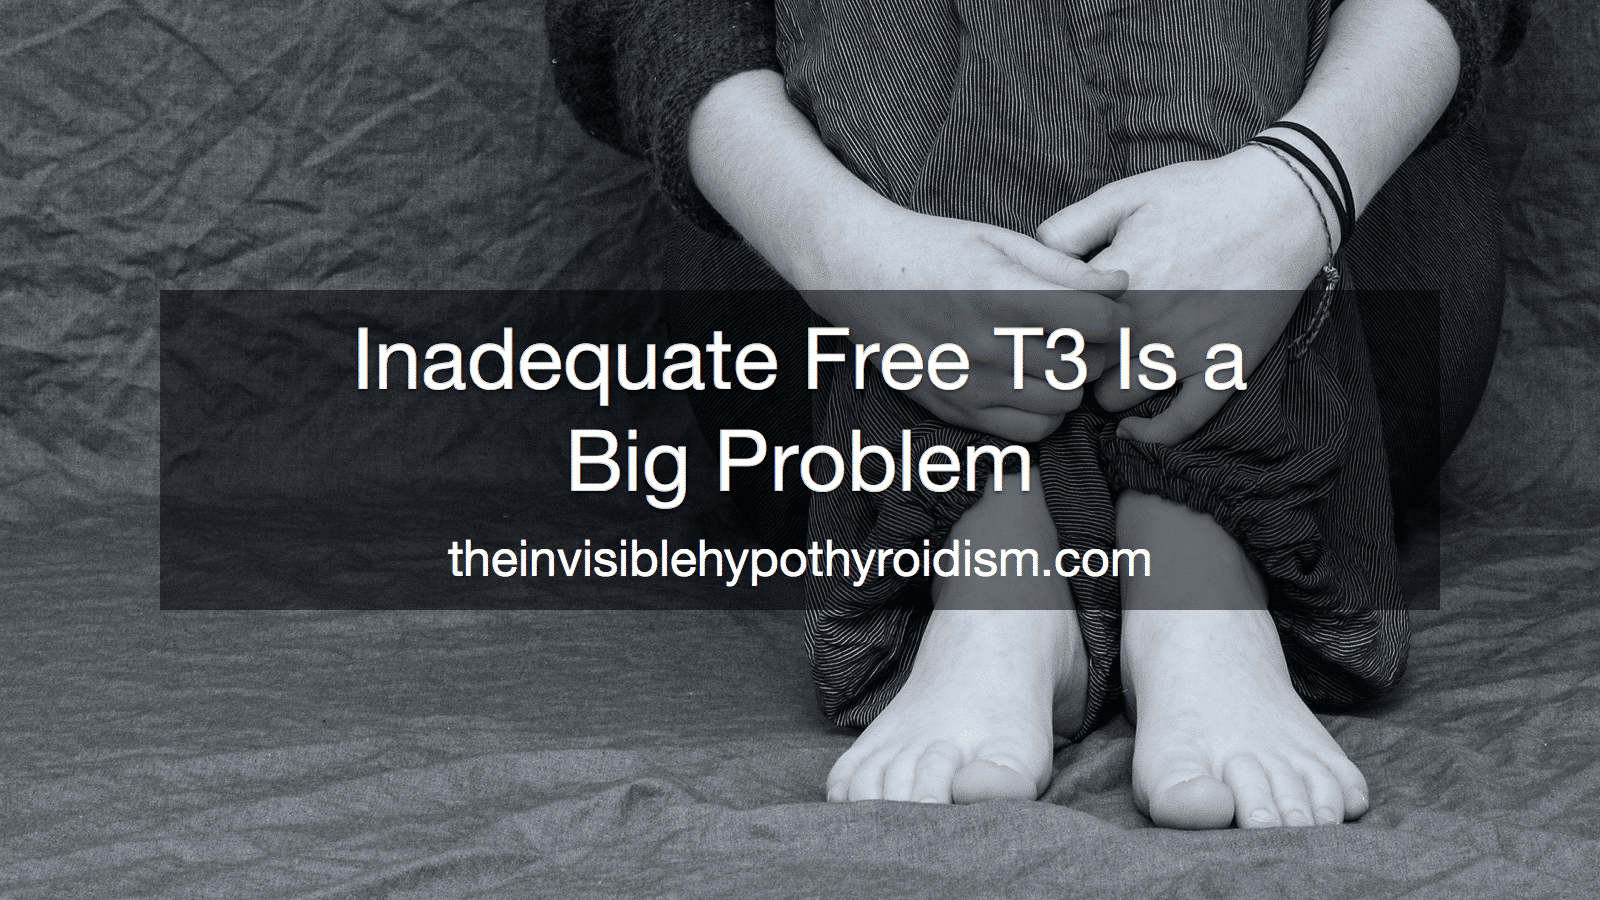 Inadequate Free T3 Is a Big Problem